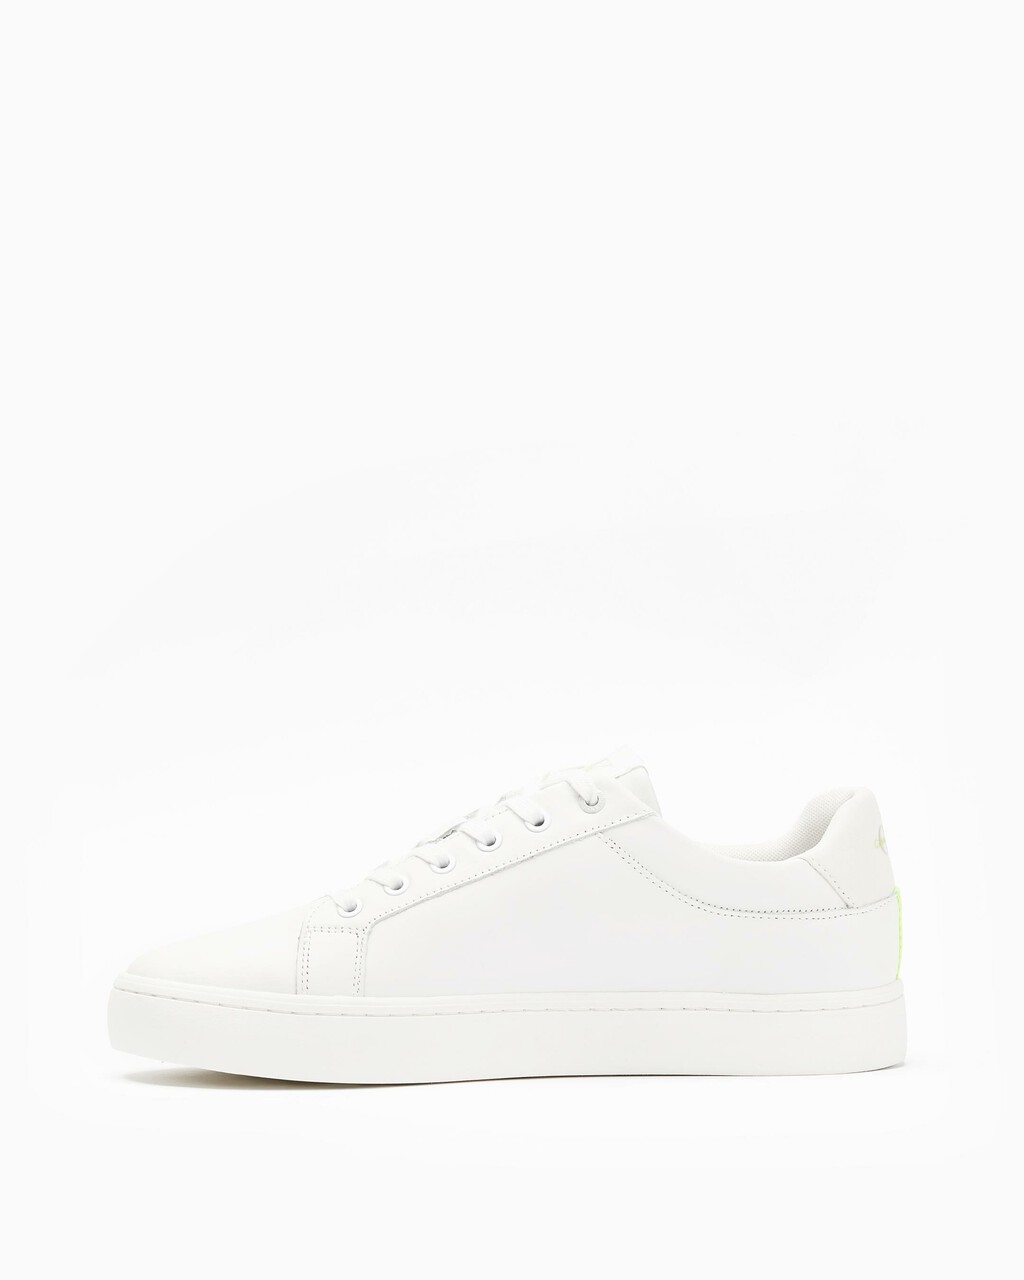 Classic Fluo Cupsole Sneakers, White/Ancient White, hi-res